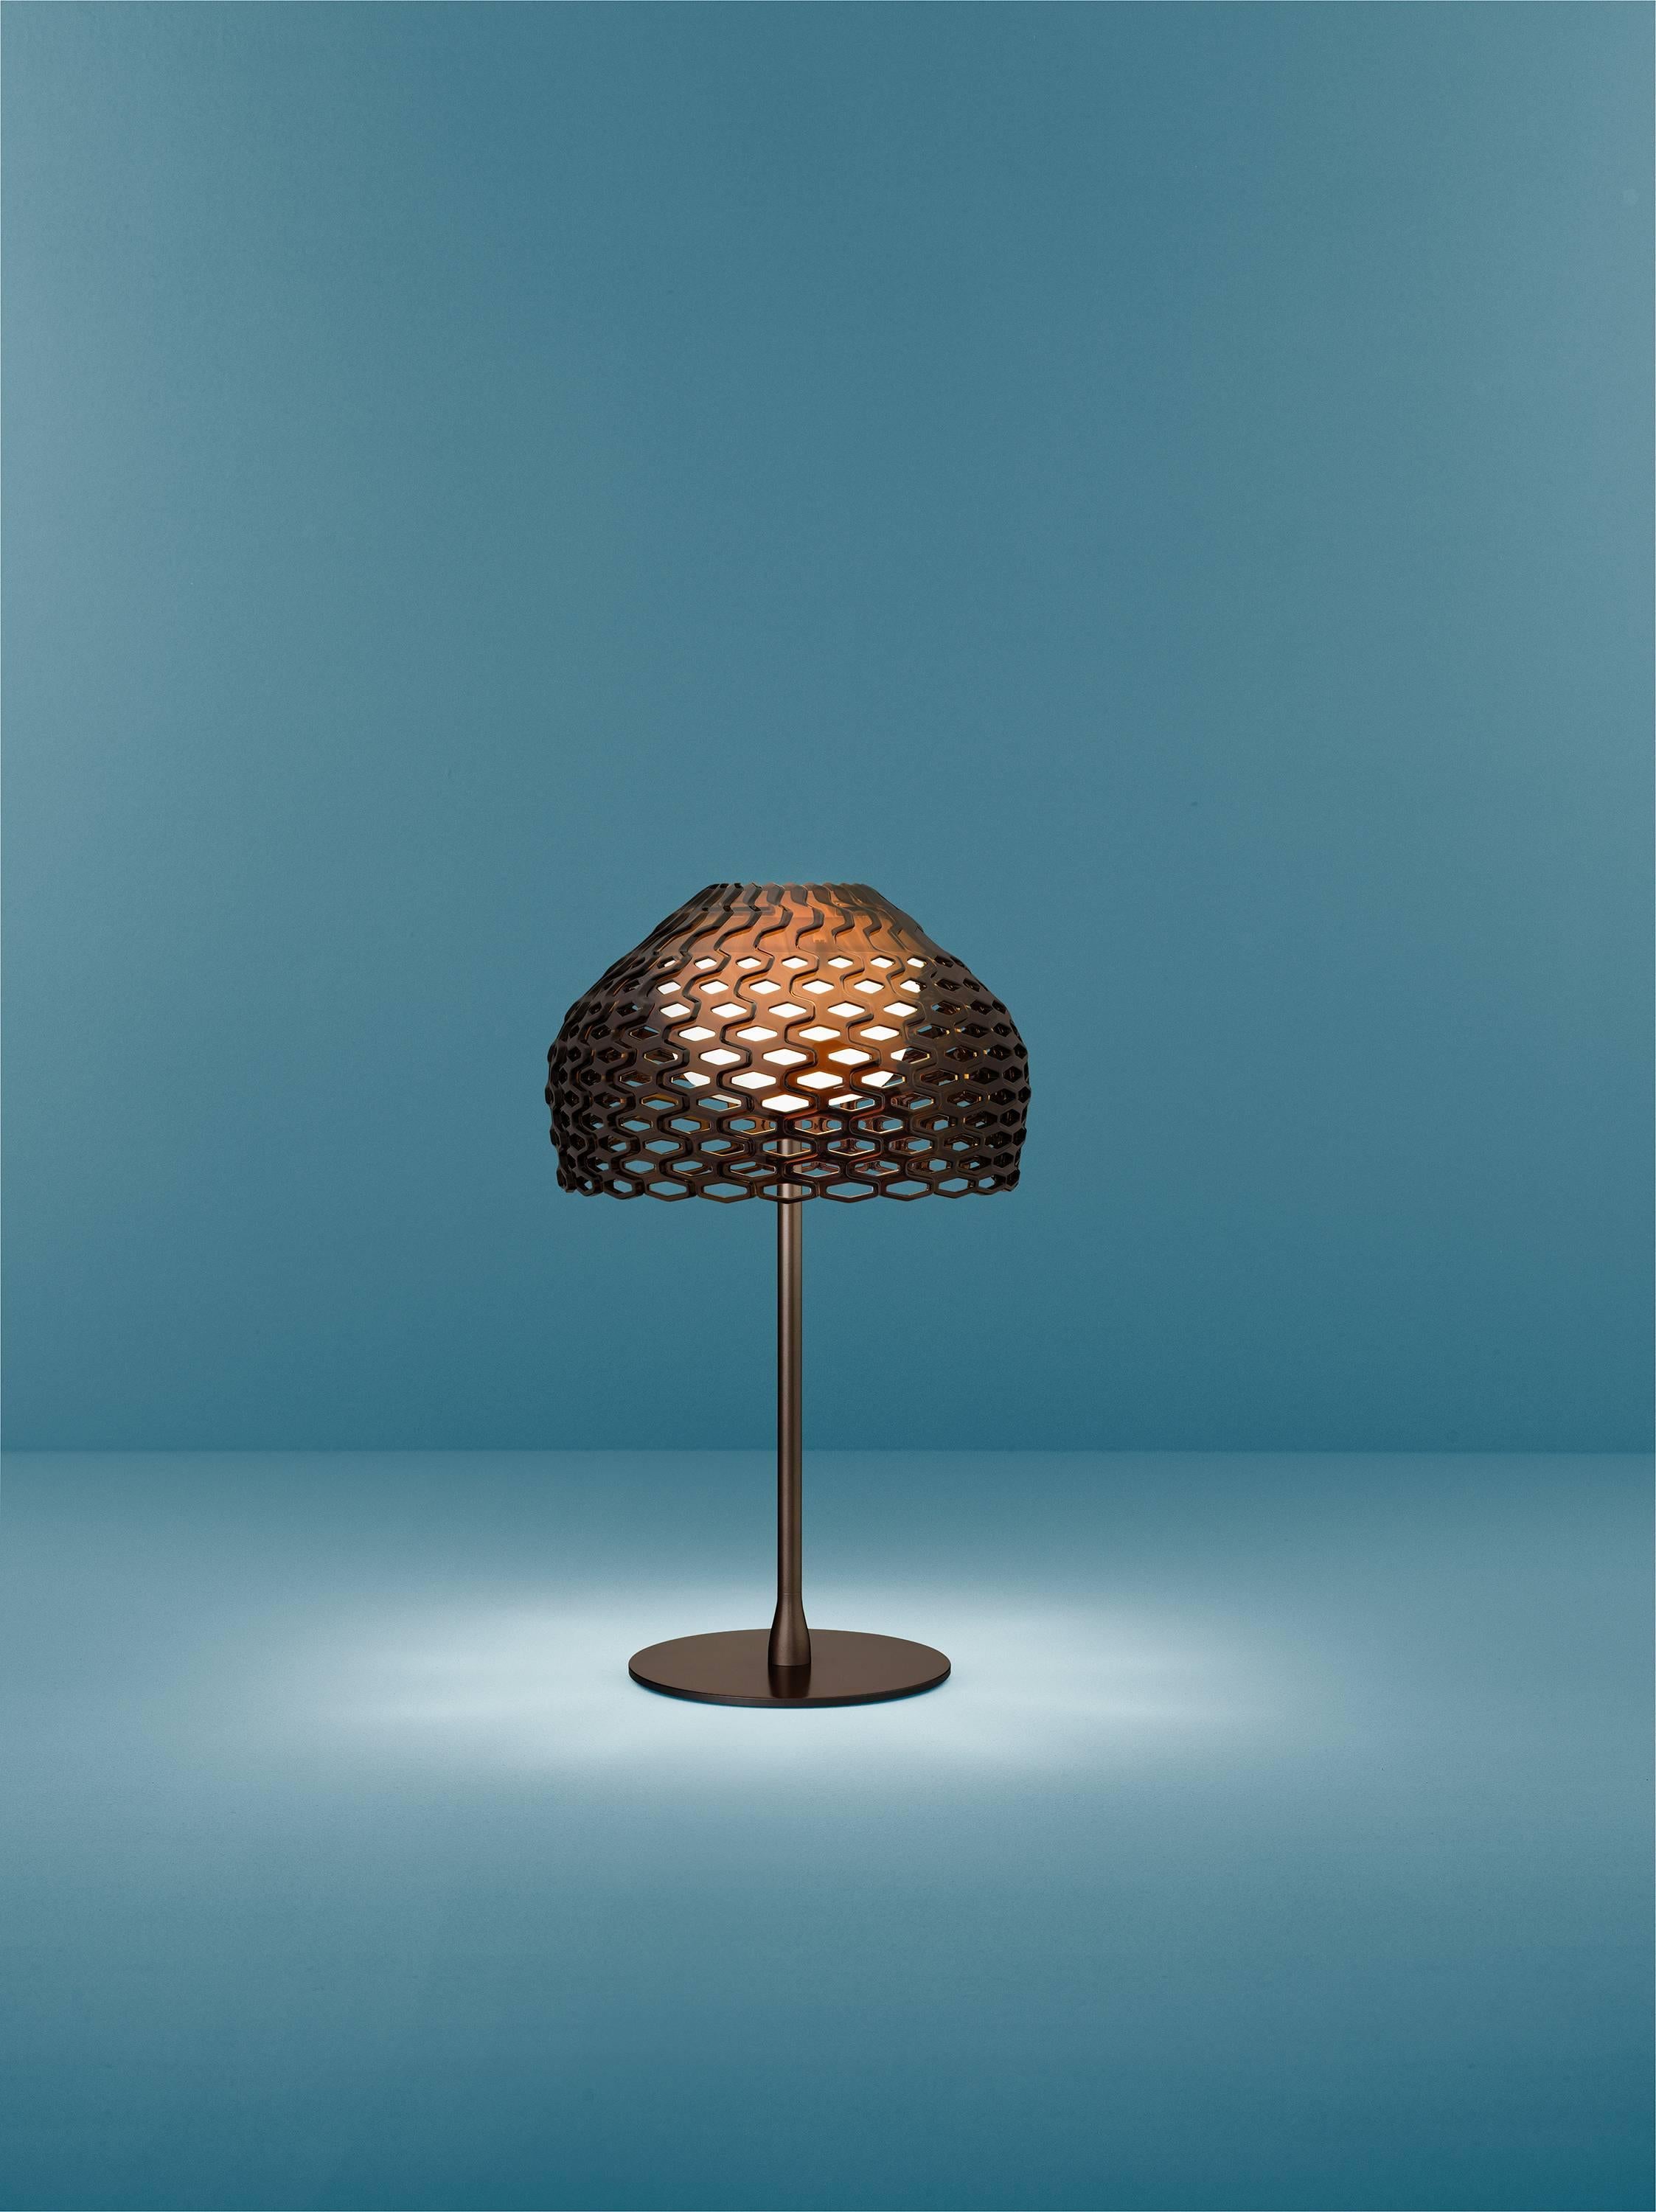 Its name is French for “armadillo,” the unassuming animal whose brilliant structure keeps it protected—and makes it unique. Designer Patricia Urquiola conceptualized this table lamp to play on the filtration of light, with remarkable results.

The